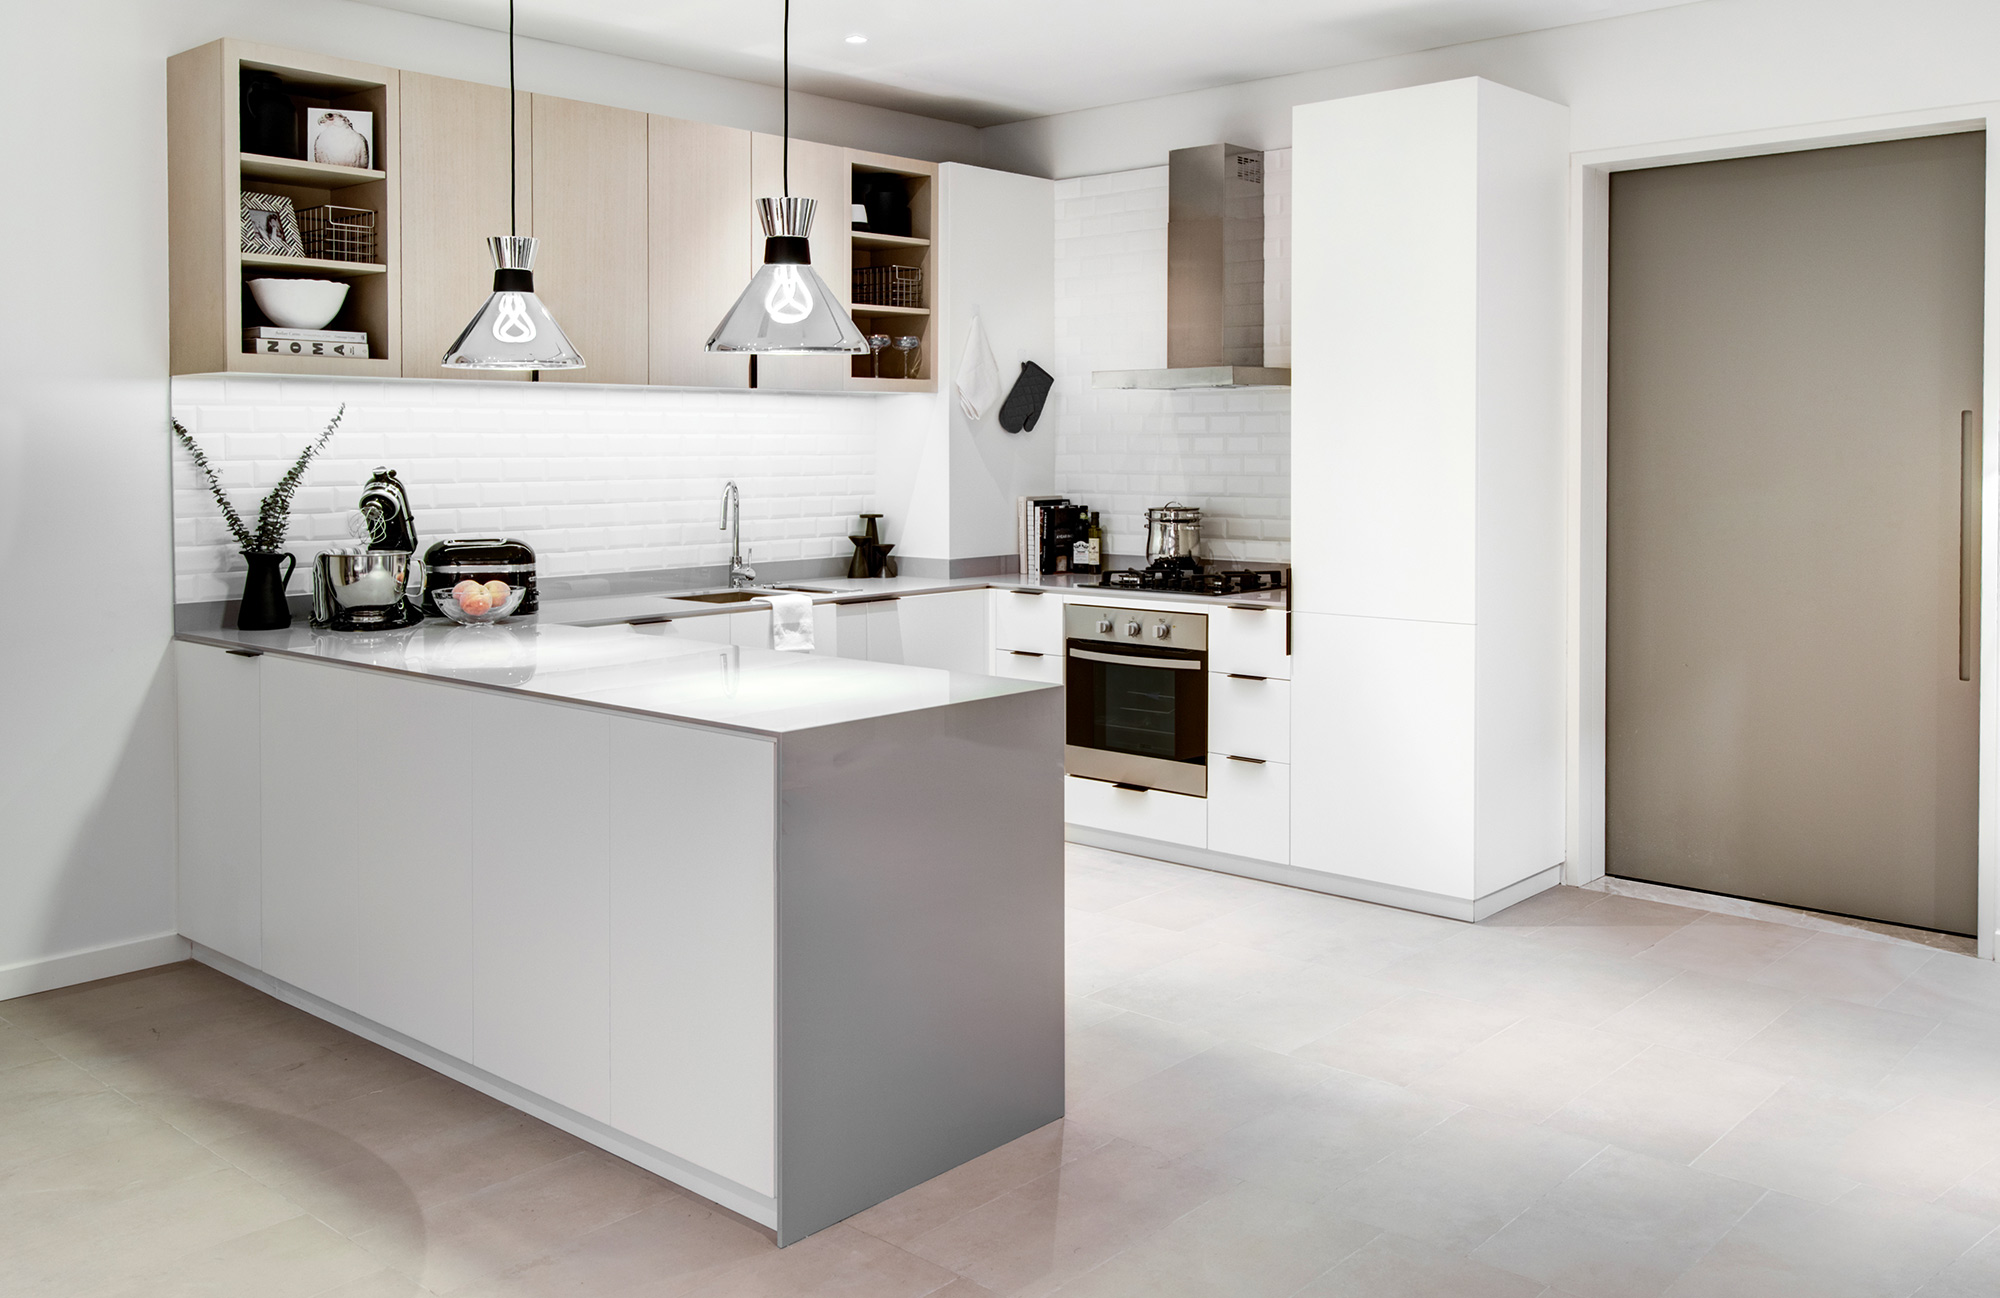 Image of Belgravia Heights I Show Apartment Kitchen in Dekton Sirius adds a welcoming touch to the kitchens of a residential development in Dubai - Cosentino